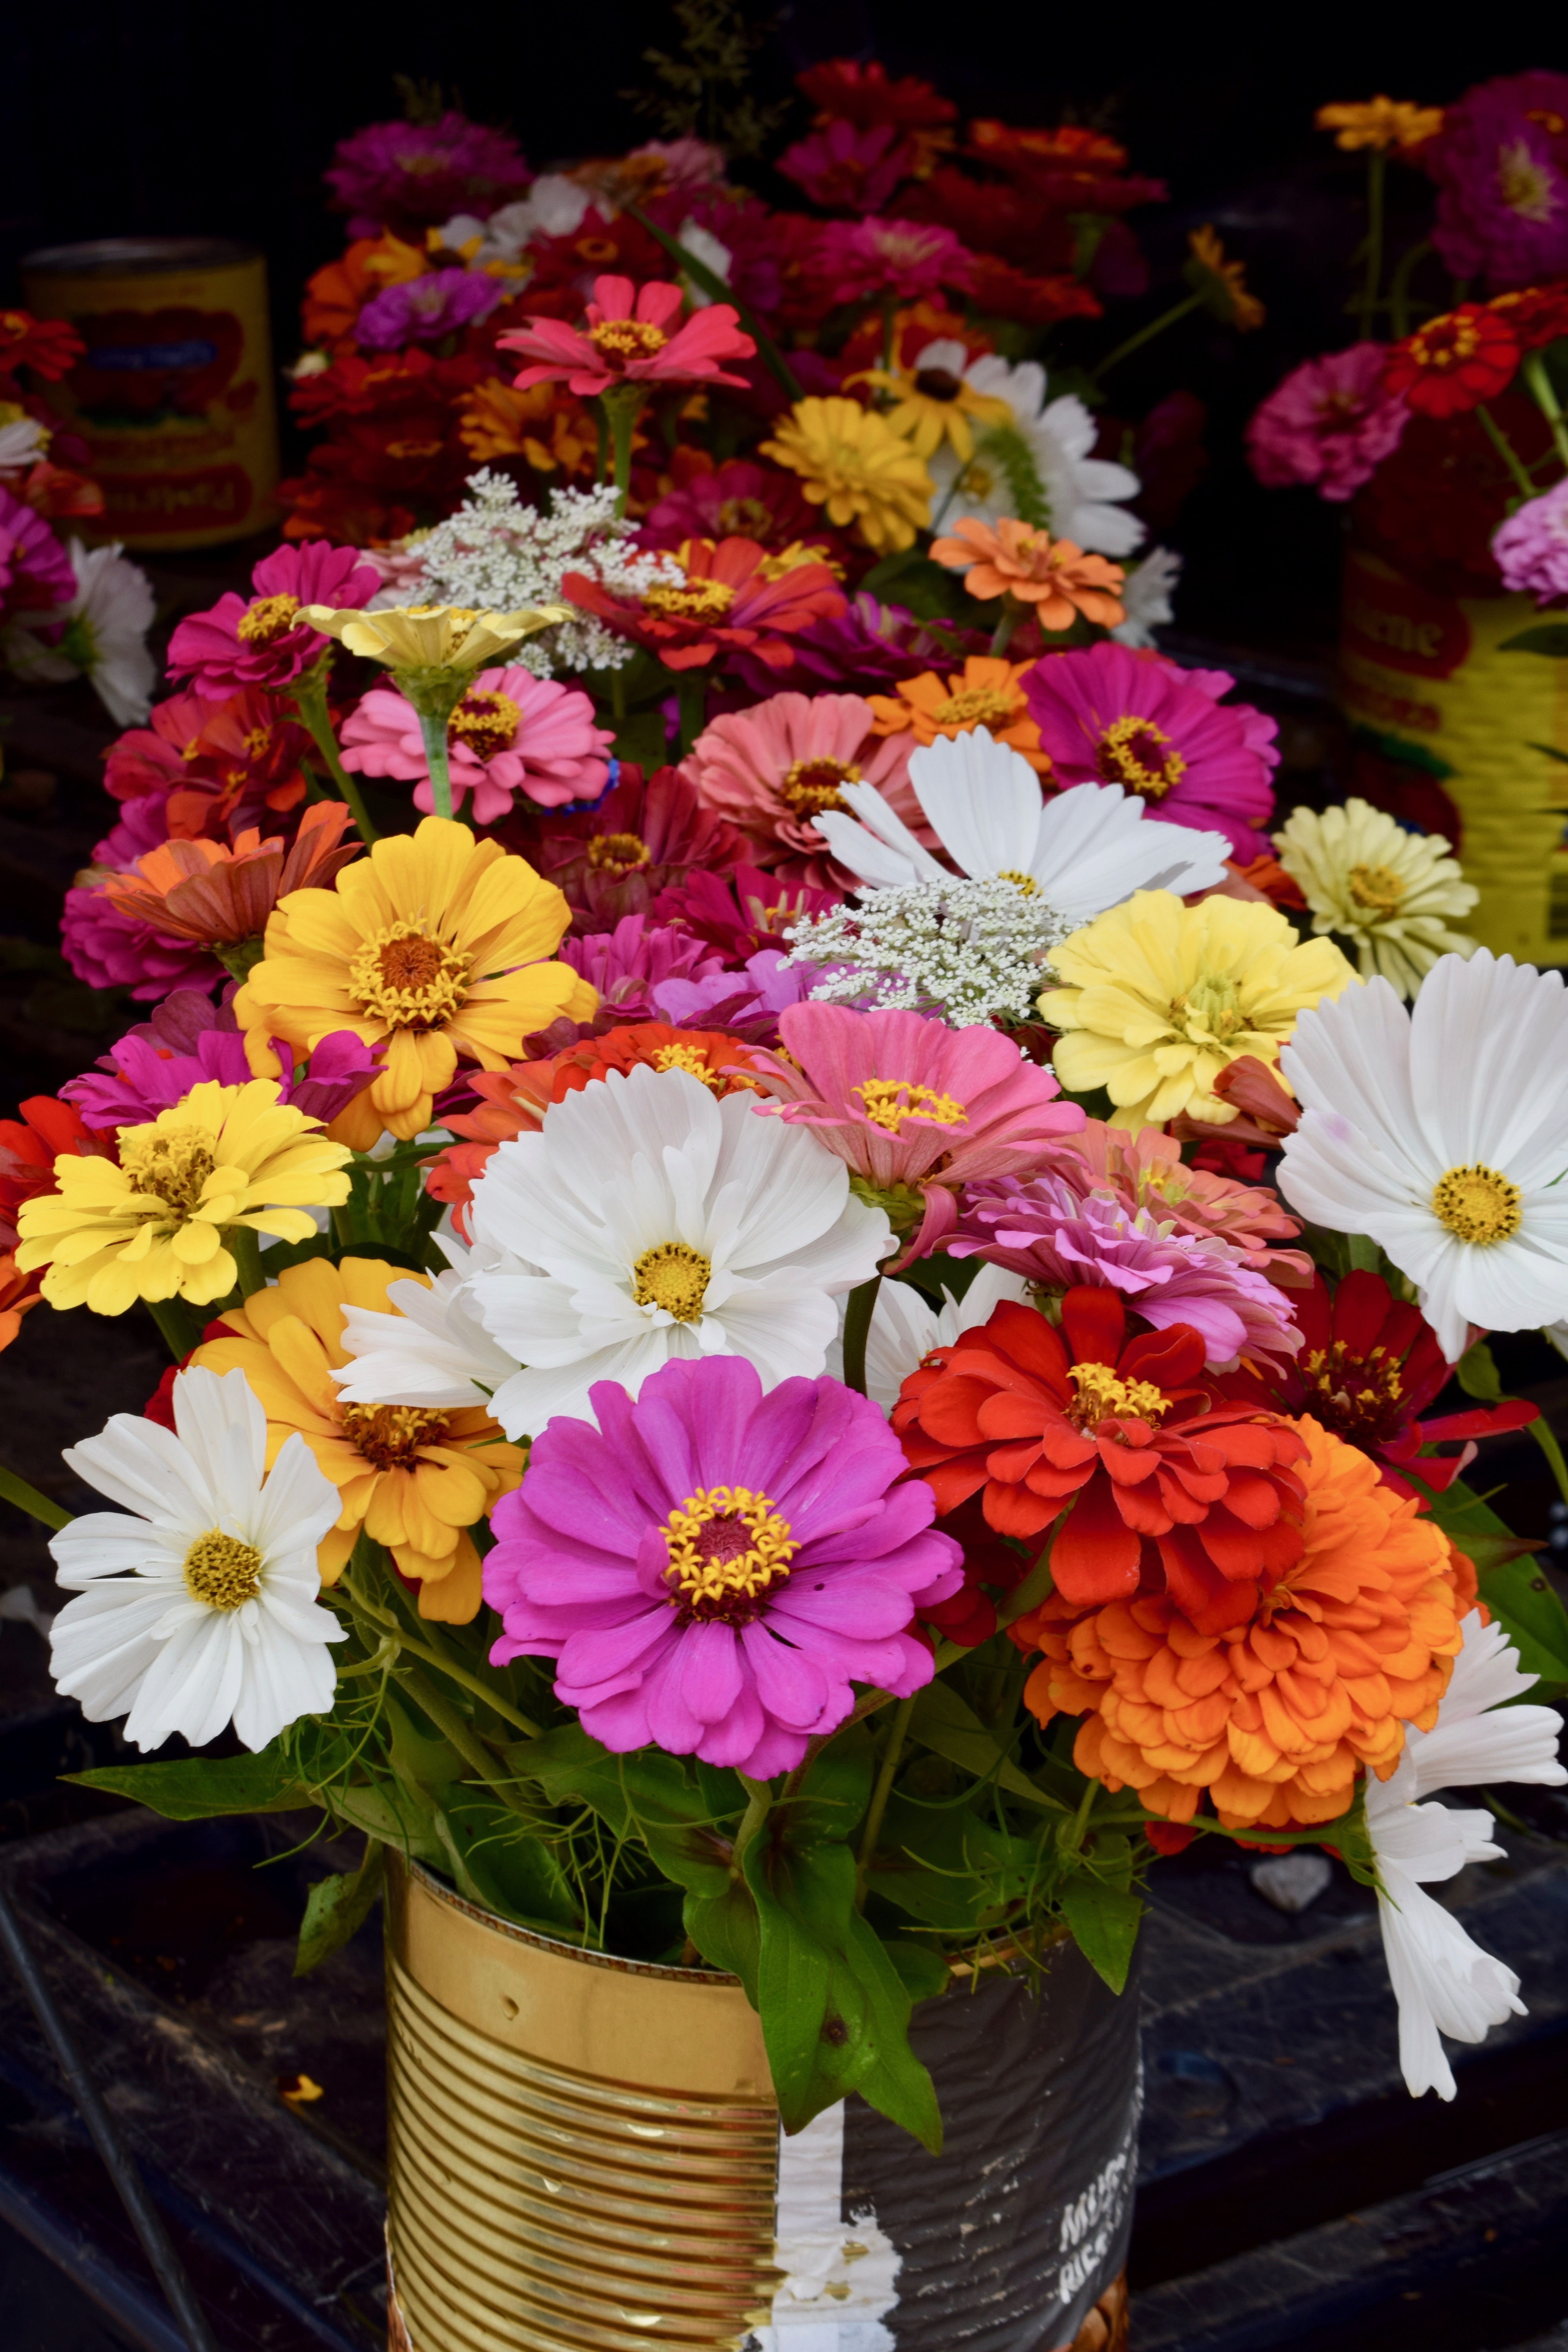 It's the weekend! Number 116. Flowers for Sale at the West Tisbury Farmers Market